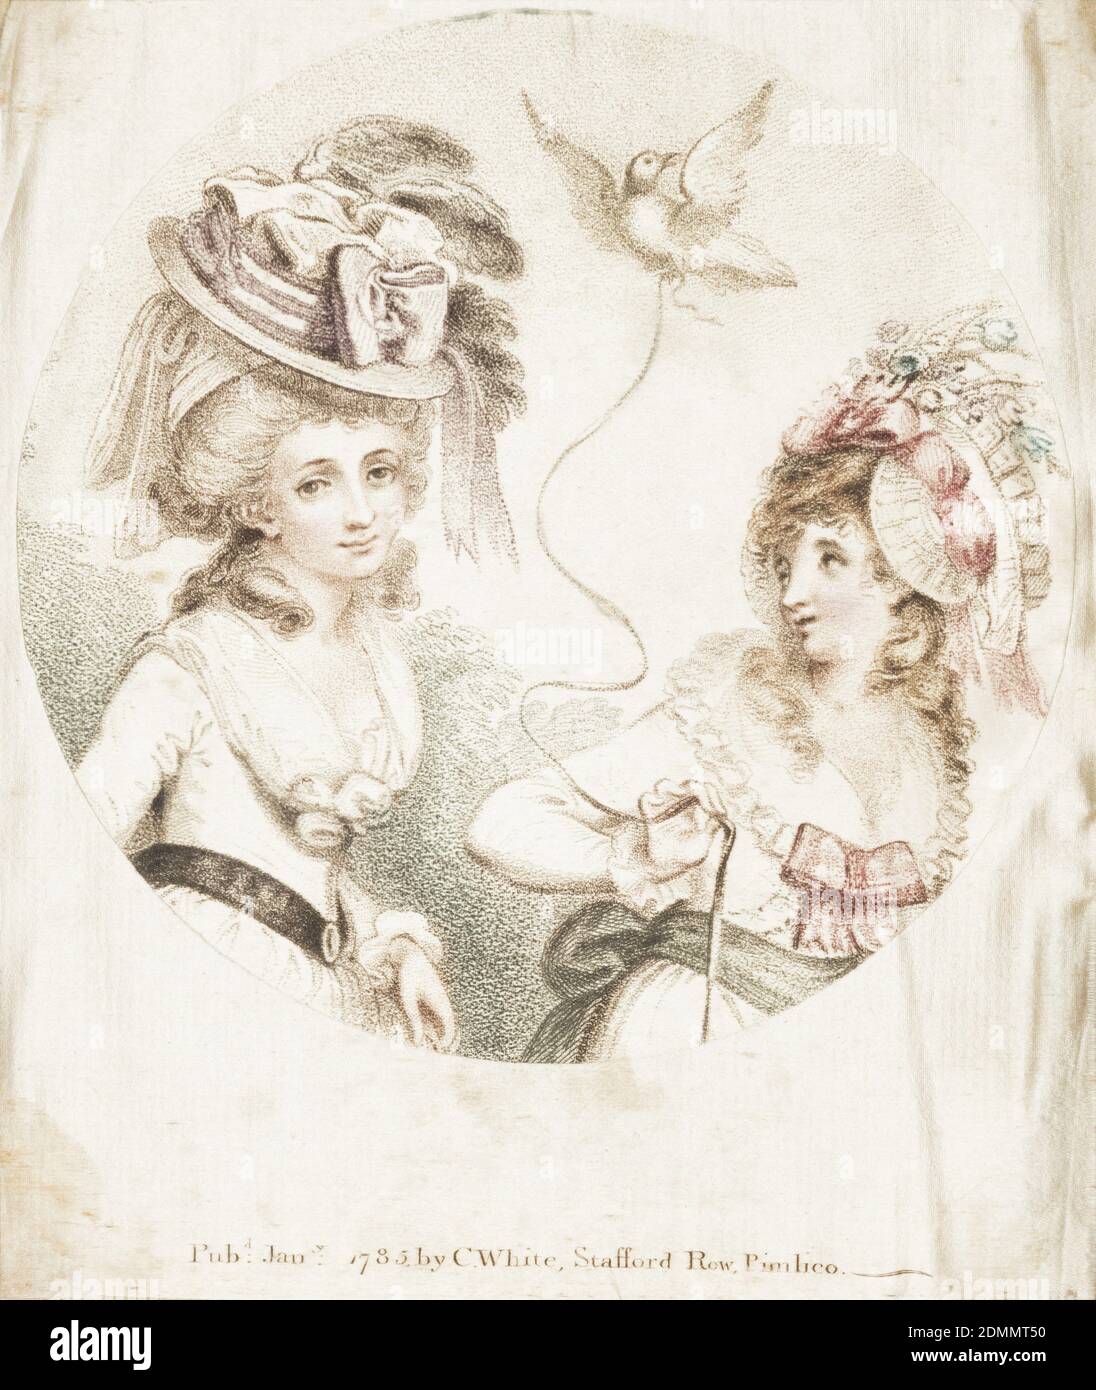 Picture, C.W. White, C.W. White, Medium: silk Technique: printed by engraved plate (with color added) on 7&1 satin, Circular picture showing two fashionably dressed women, one holding a bird on a string., England, 1785, printed, dyed & painted textiles, Picture Stock Photo